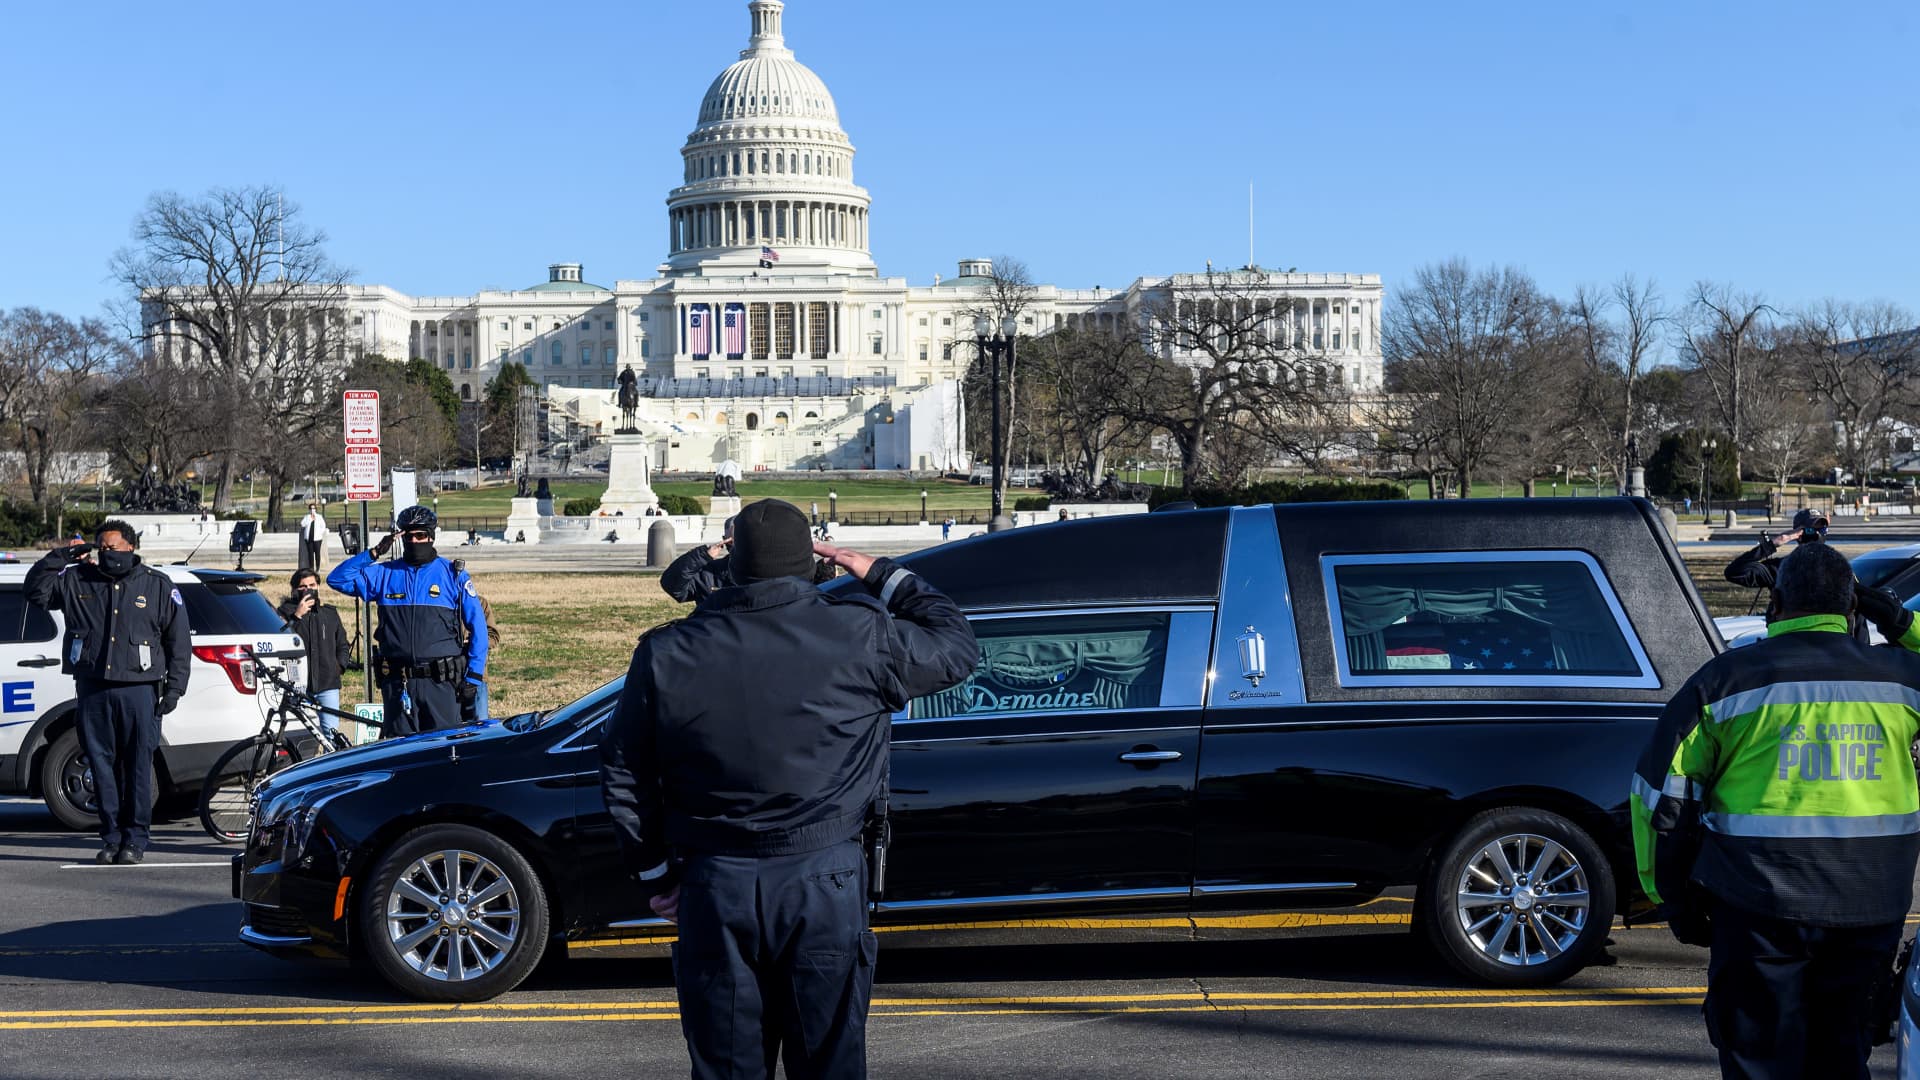 US Capital police stand at attention as the casket with fallen police officer, Brian Sicknick, passes during a funeral procession in Washington, DC on January 10, 2021.